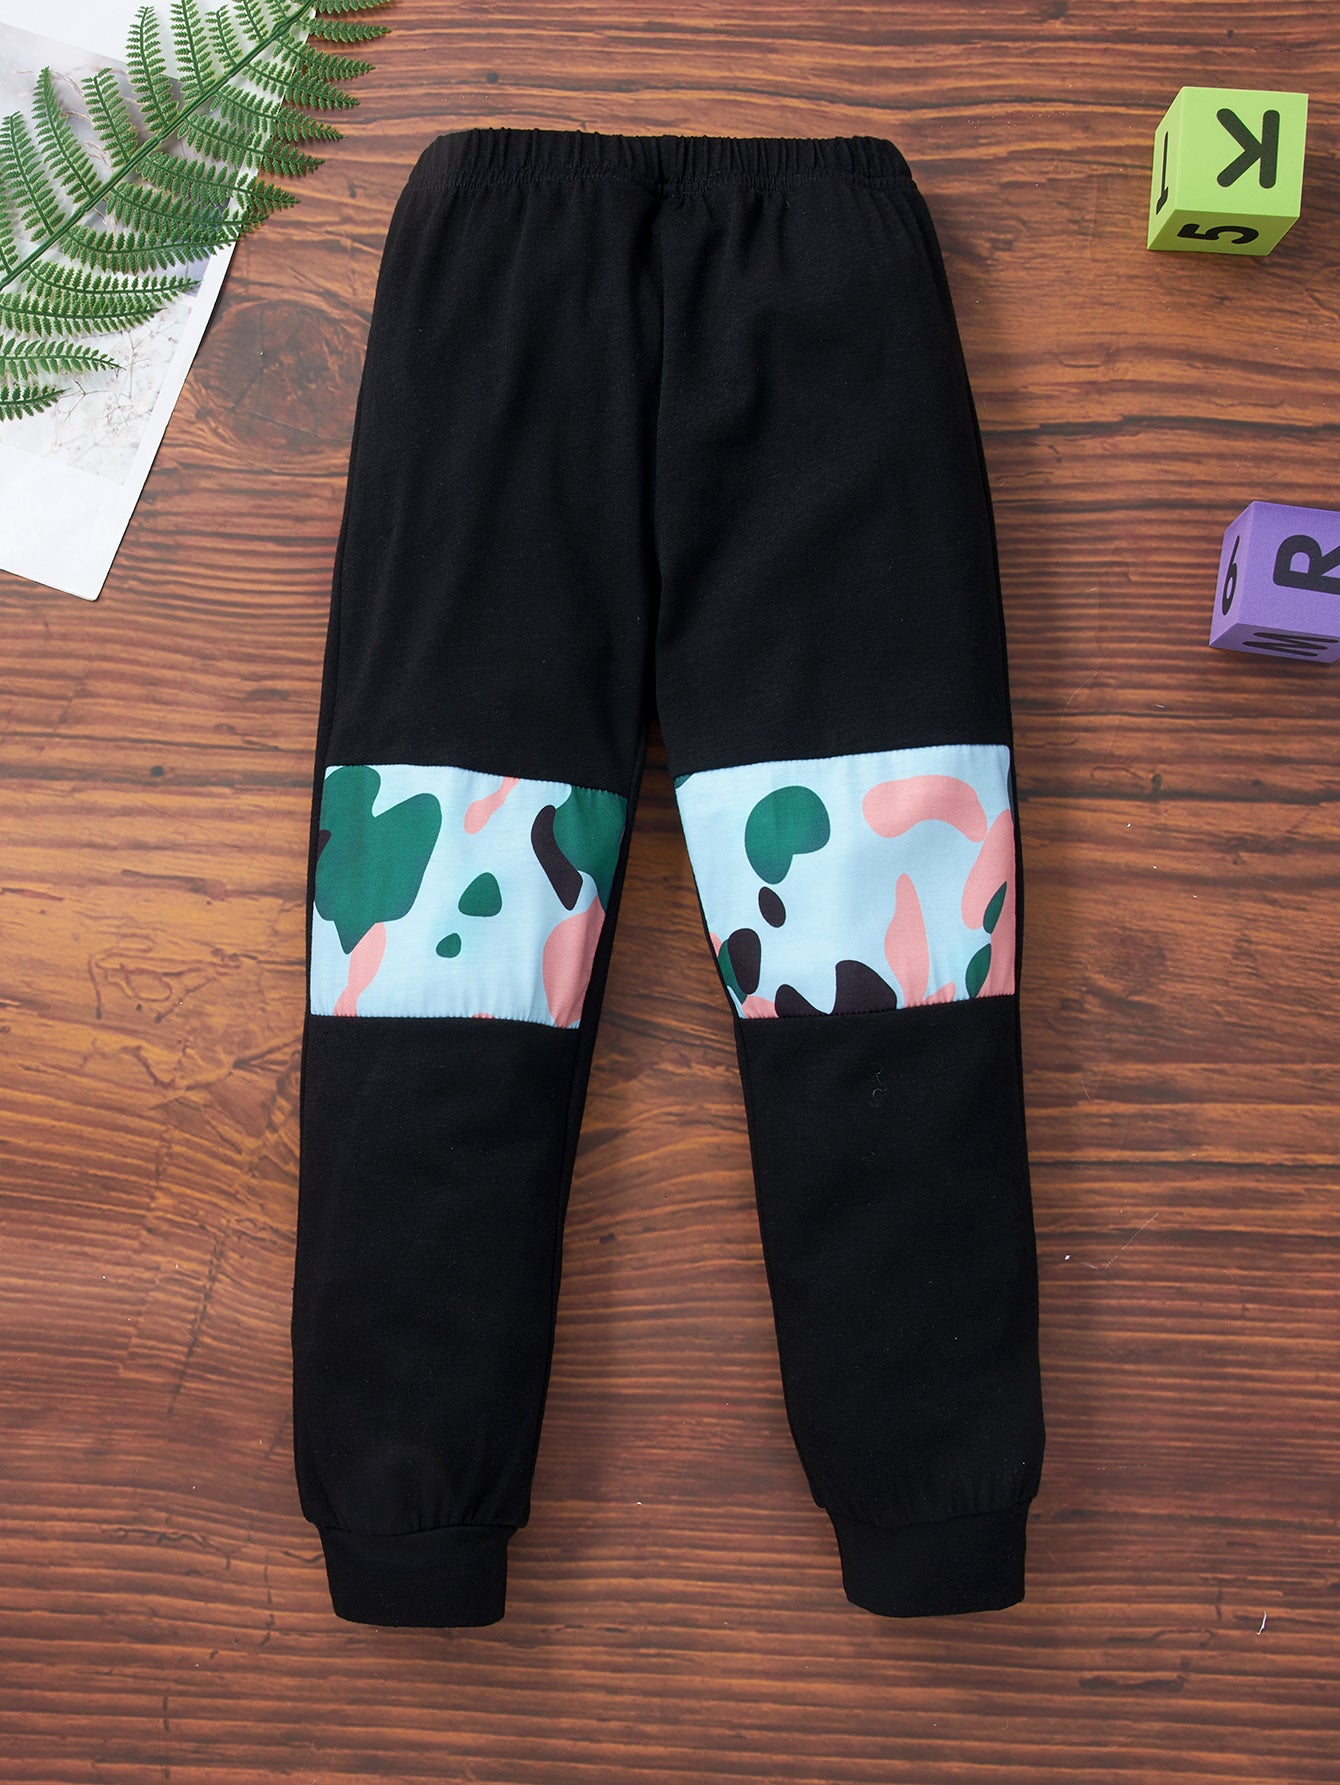 Kids Camouflage Elephant Graphic Tee and Joggers Set